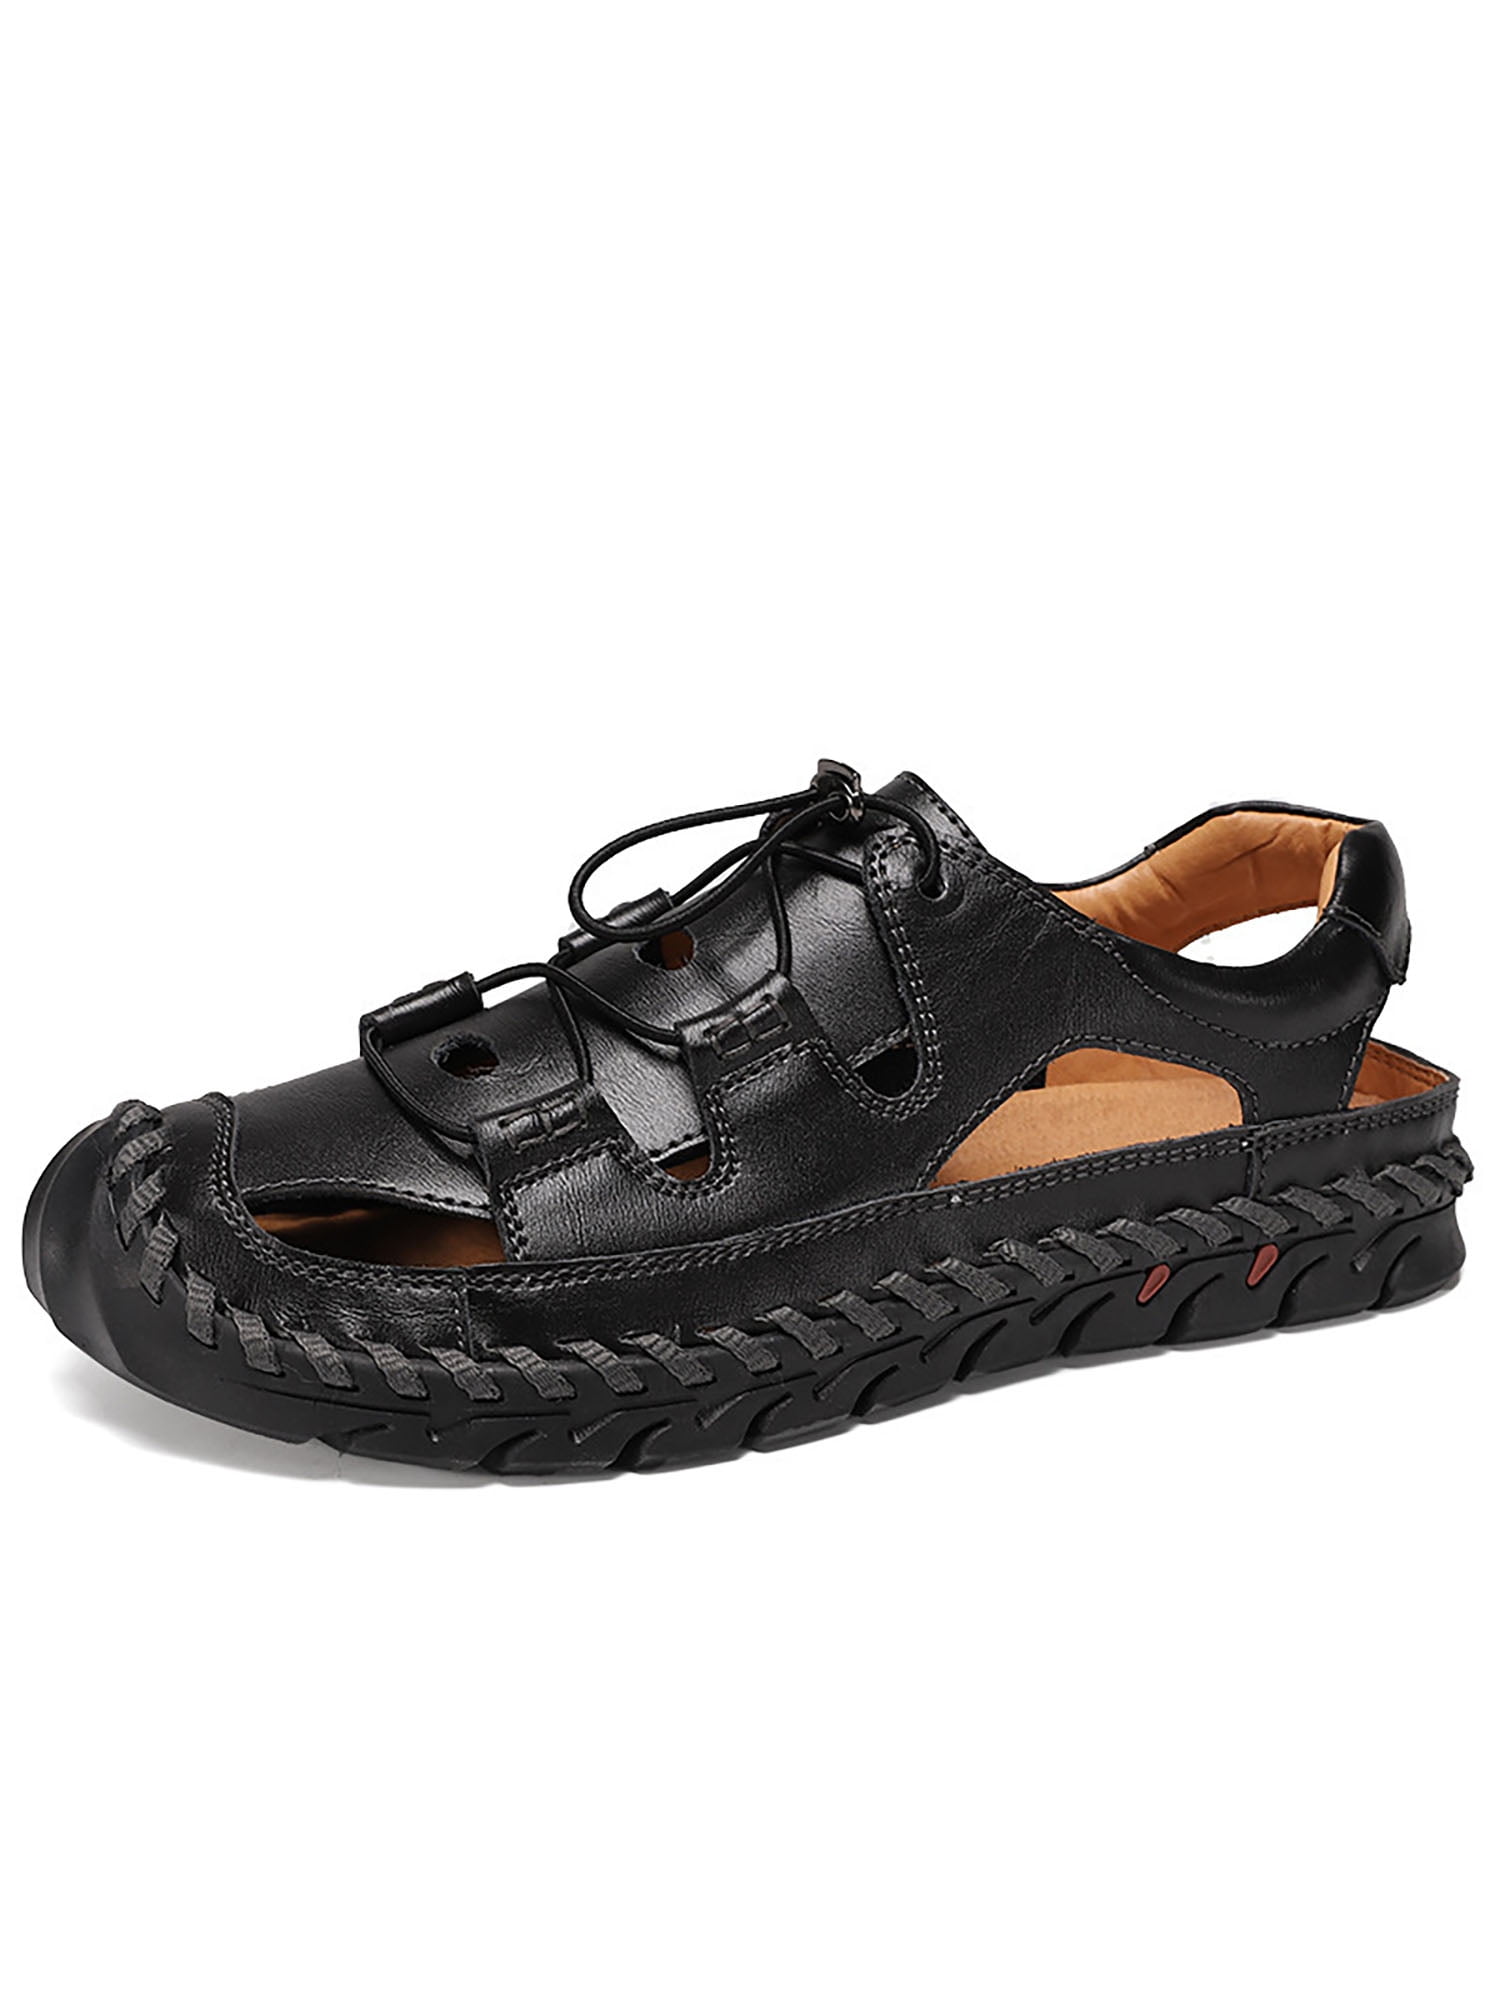 Vince Outdoor Sandals black casual look Shoes Sandals Outdoor Sandals 